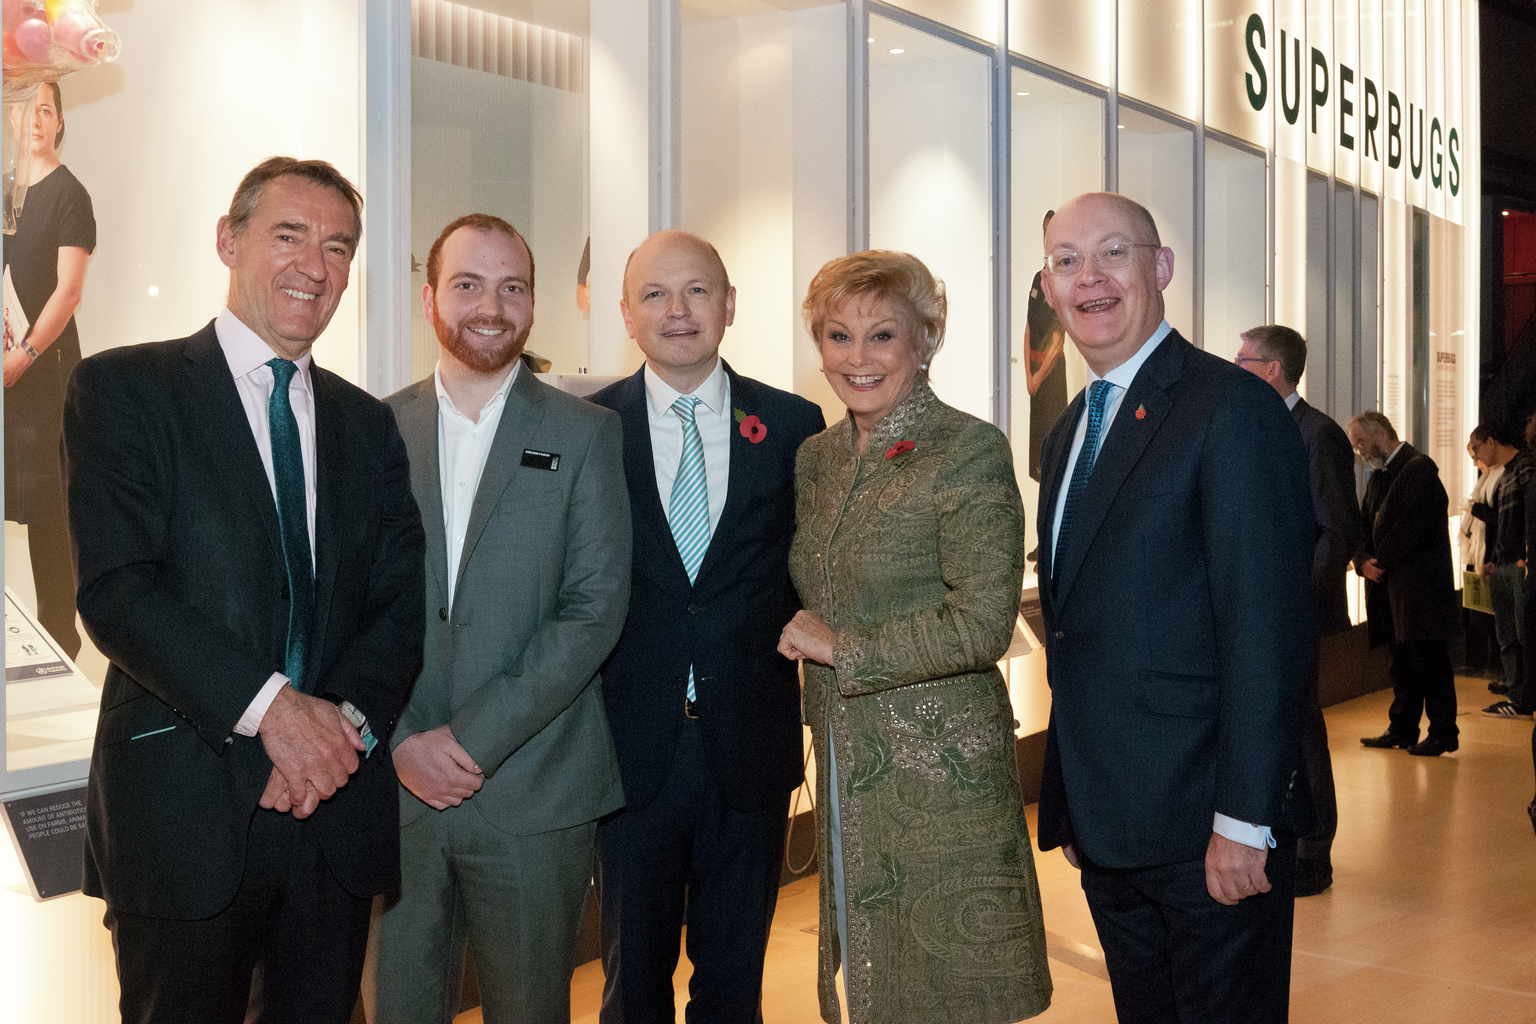 l-r: Lord O'Neill, Sheldon Paquin (Superbugs curator), Erik Nordkamp (Managing Director of Pfizer UK), Angela Rippon and Ian Blatchford (Director of the Science Museum)